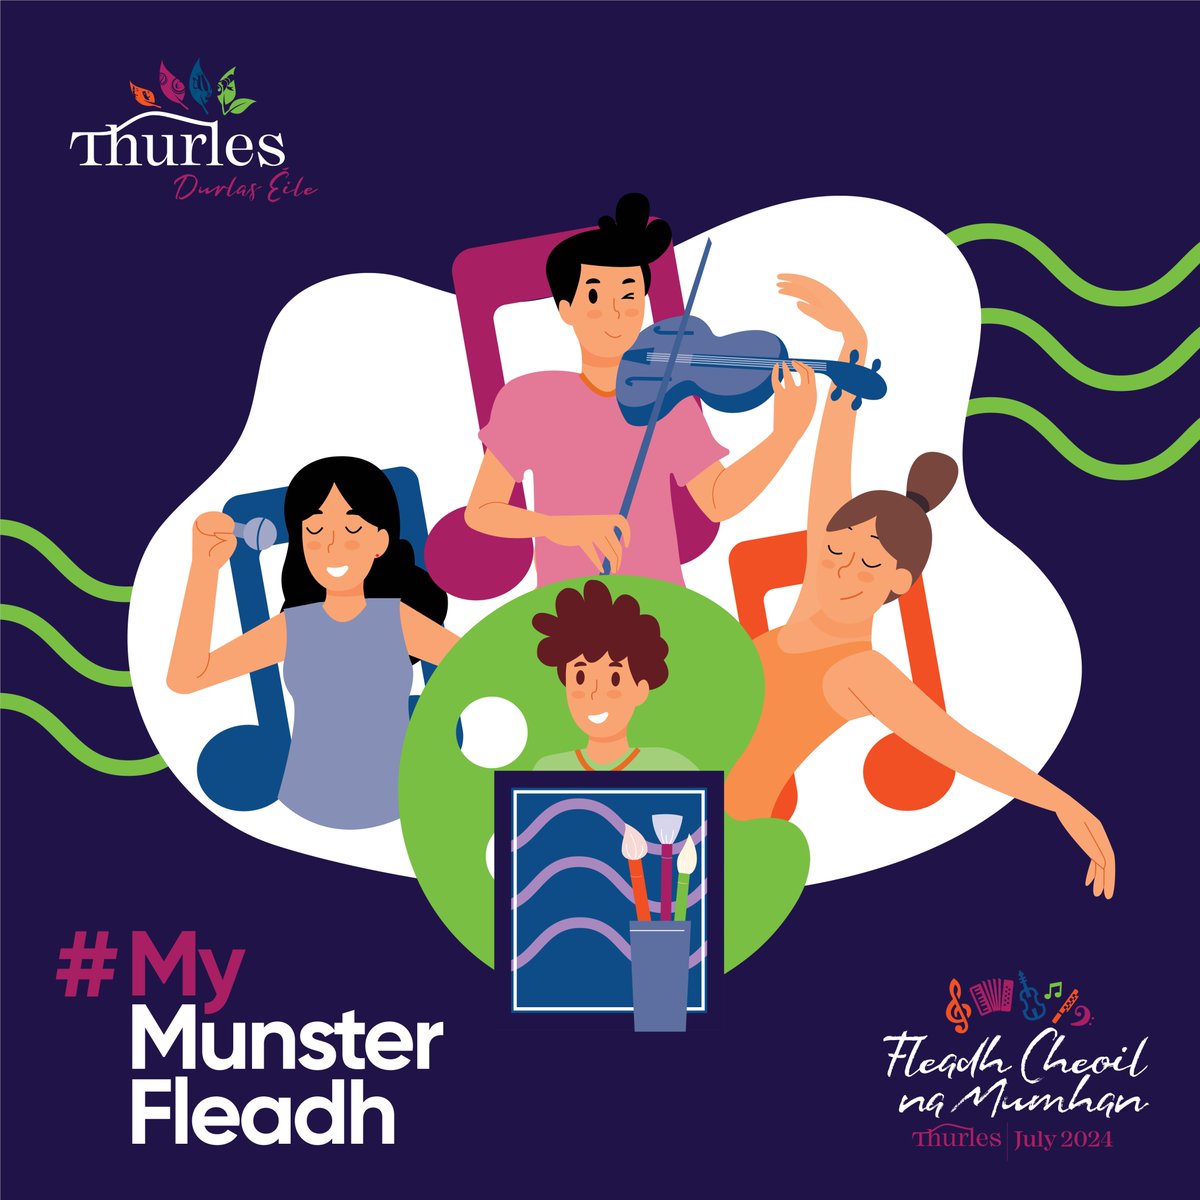 We are delighted to announce our latest competition for primary and secondary schools to celebrate the Munster Fleadh being held in Thurles this July. 👉 thurles.ie/my-munster-fle…. *Entries only on Facebook & Instagram